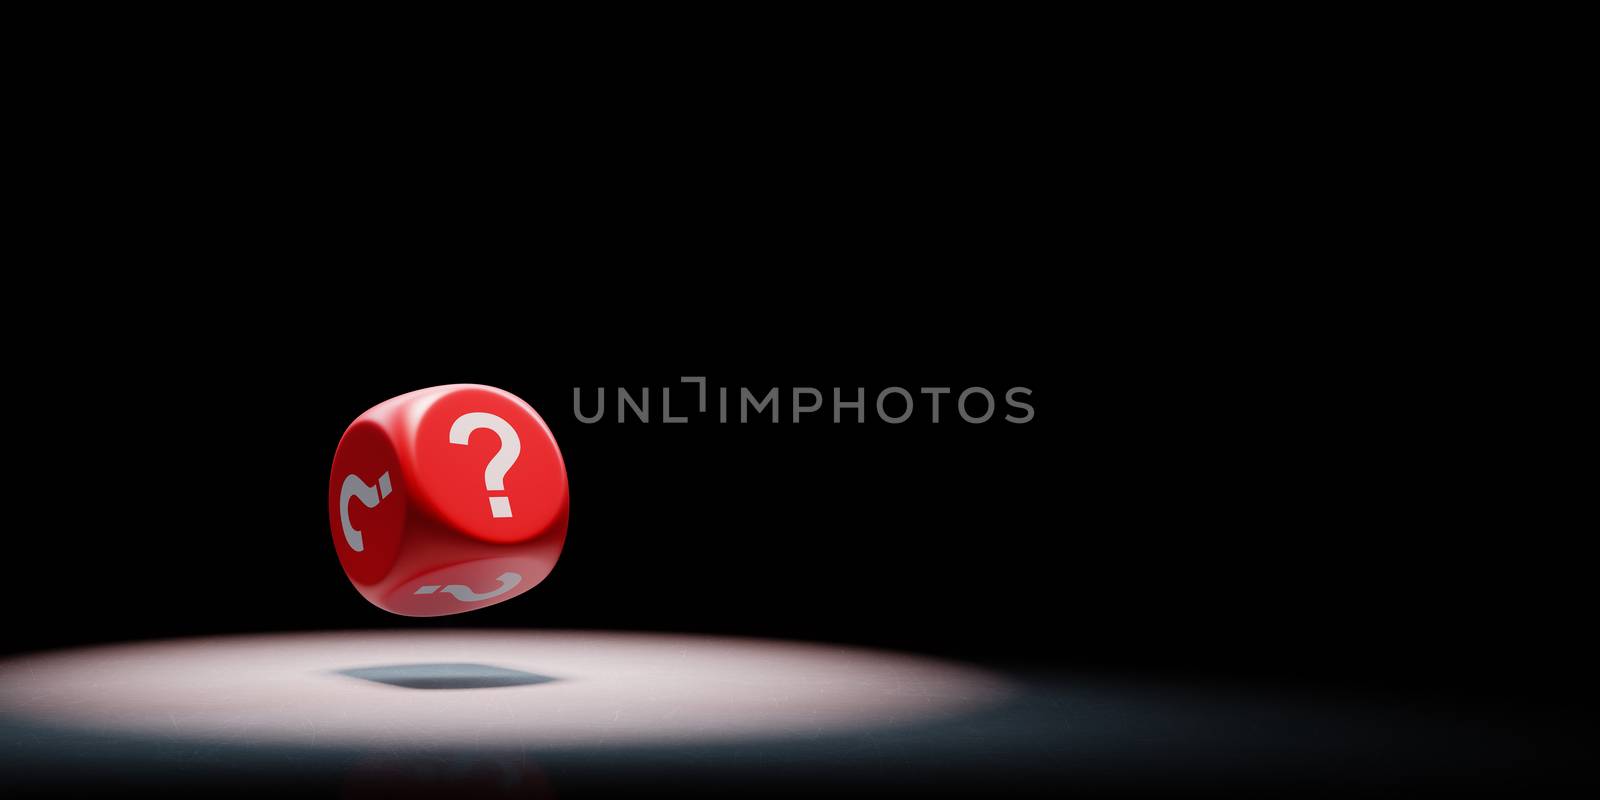 Question Mark Dice Spotlighted on Black Background by make